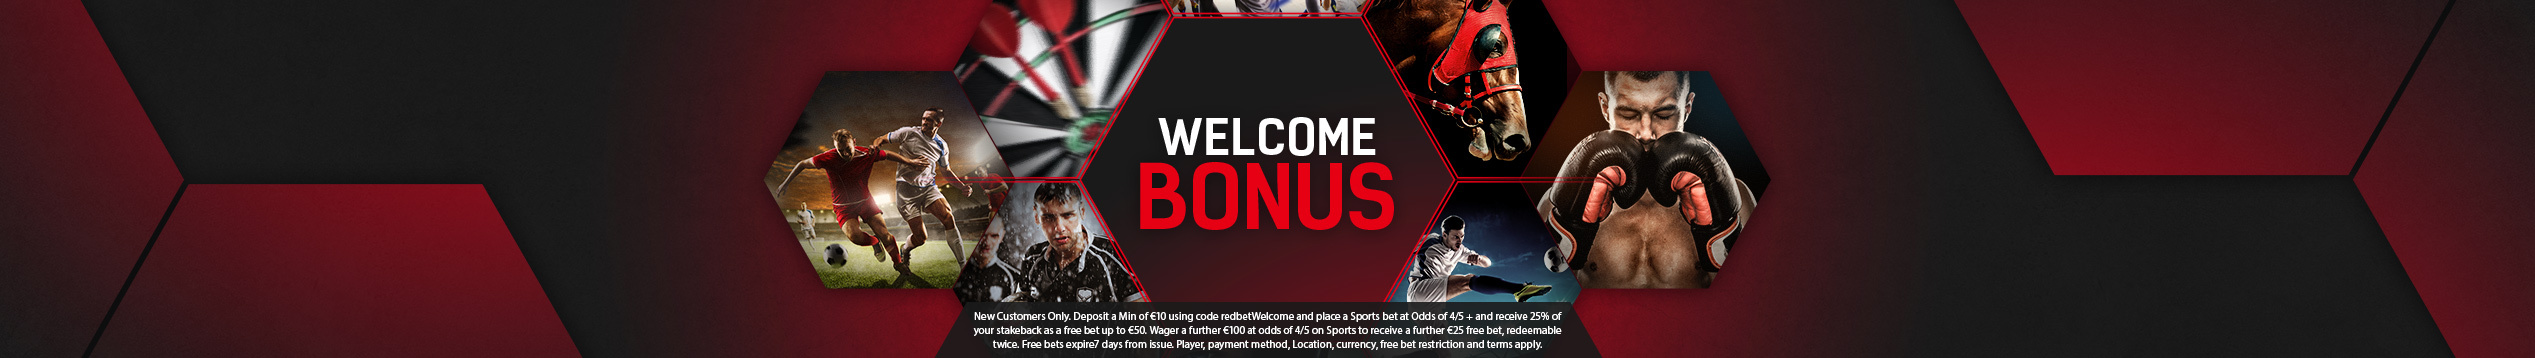 bookmaker redbet welcome offer